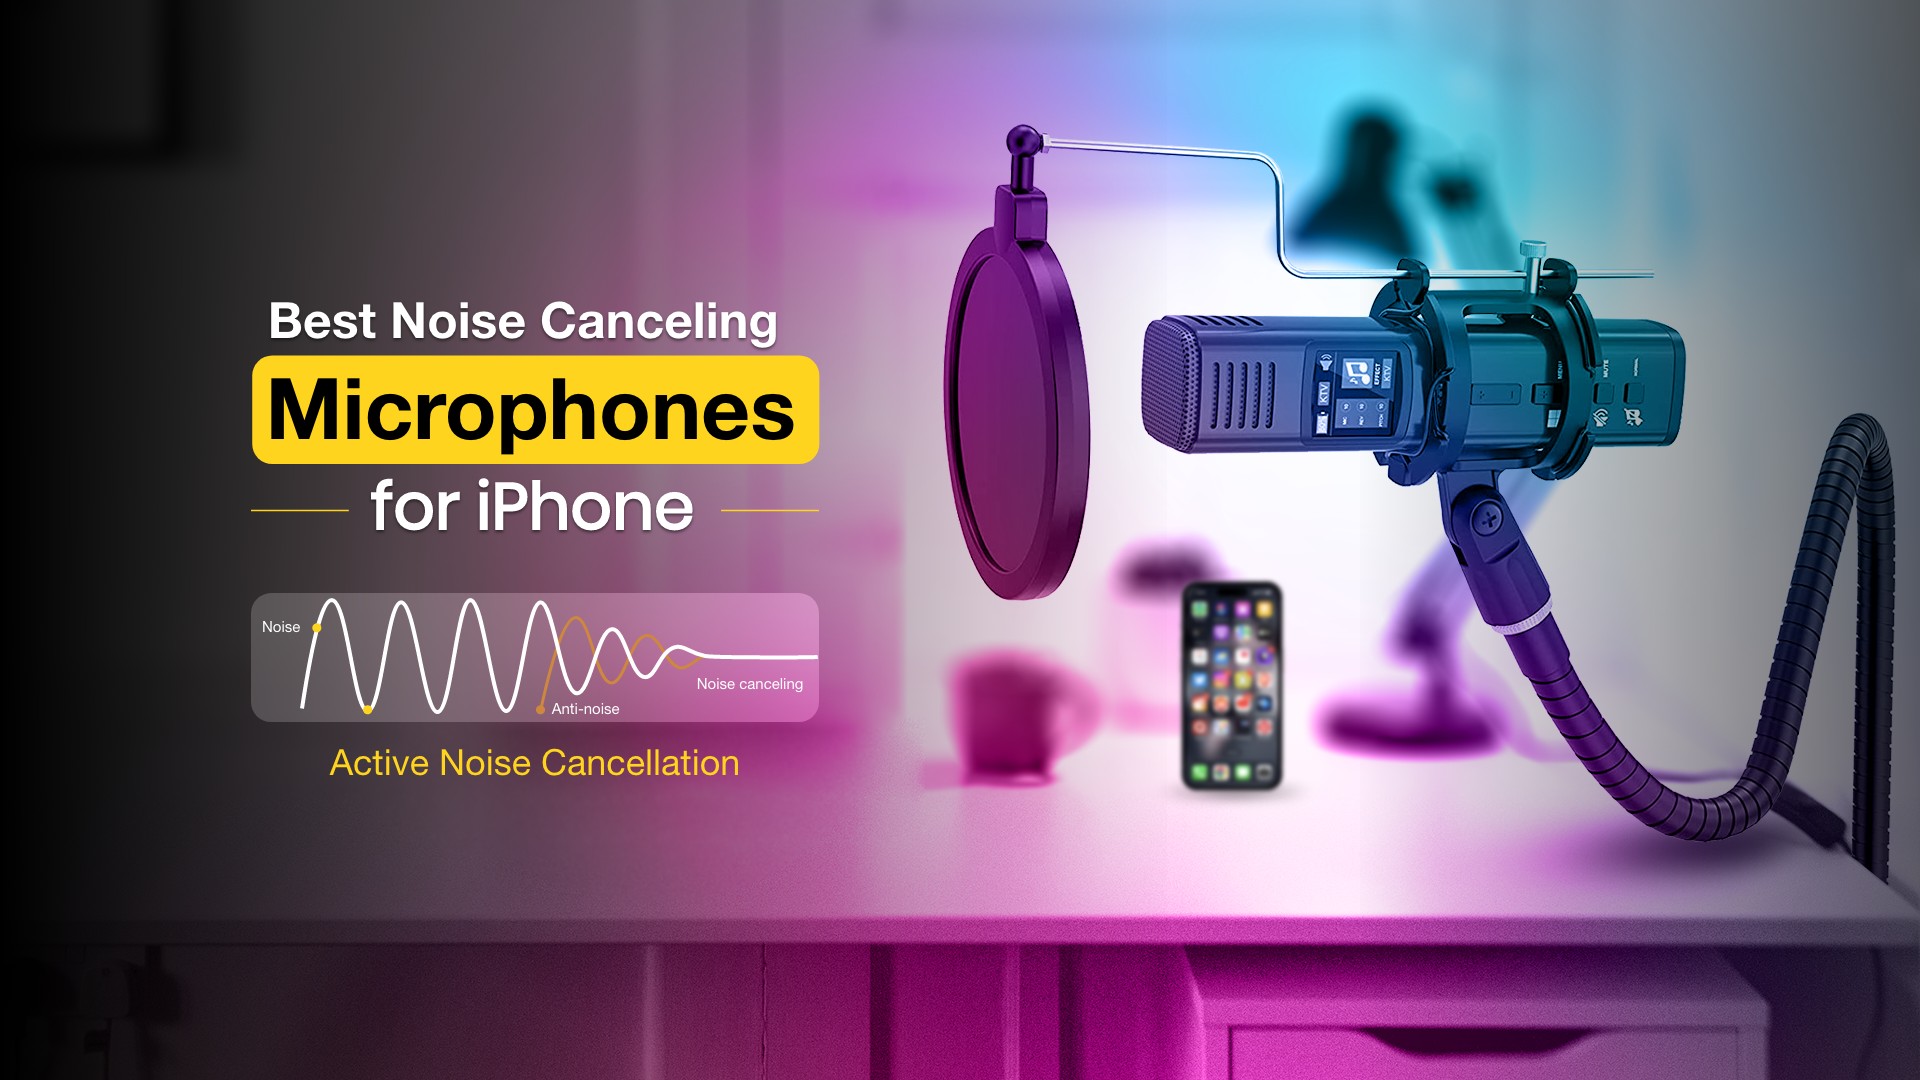 Best Noise Canceling Microphones for iPhone